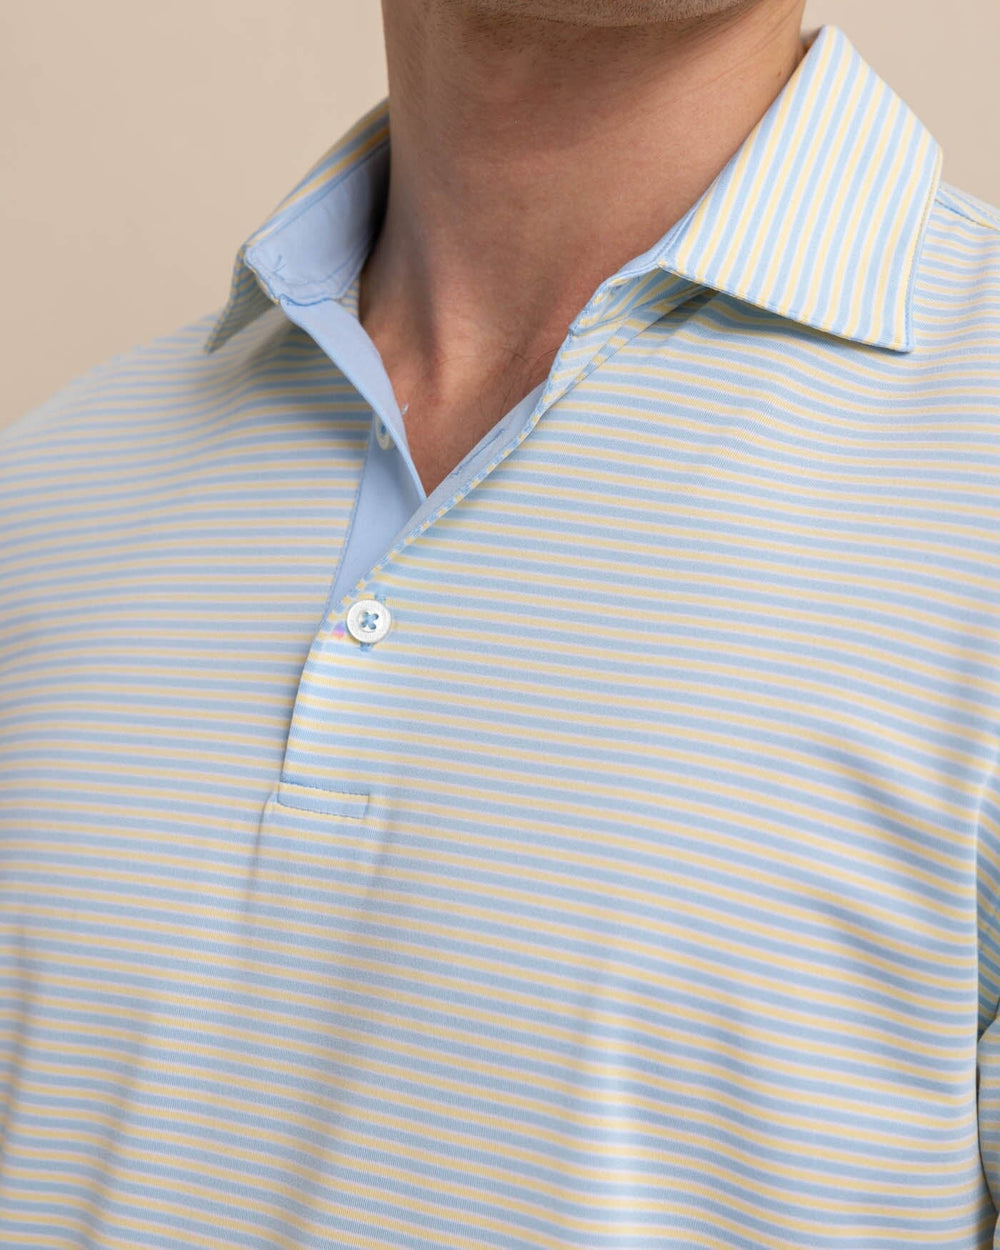 The detail view of the Southern Tide Driver Verdae Stripe Polo by Southern Tide - Golden Haze Yellow